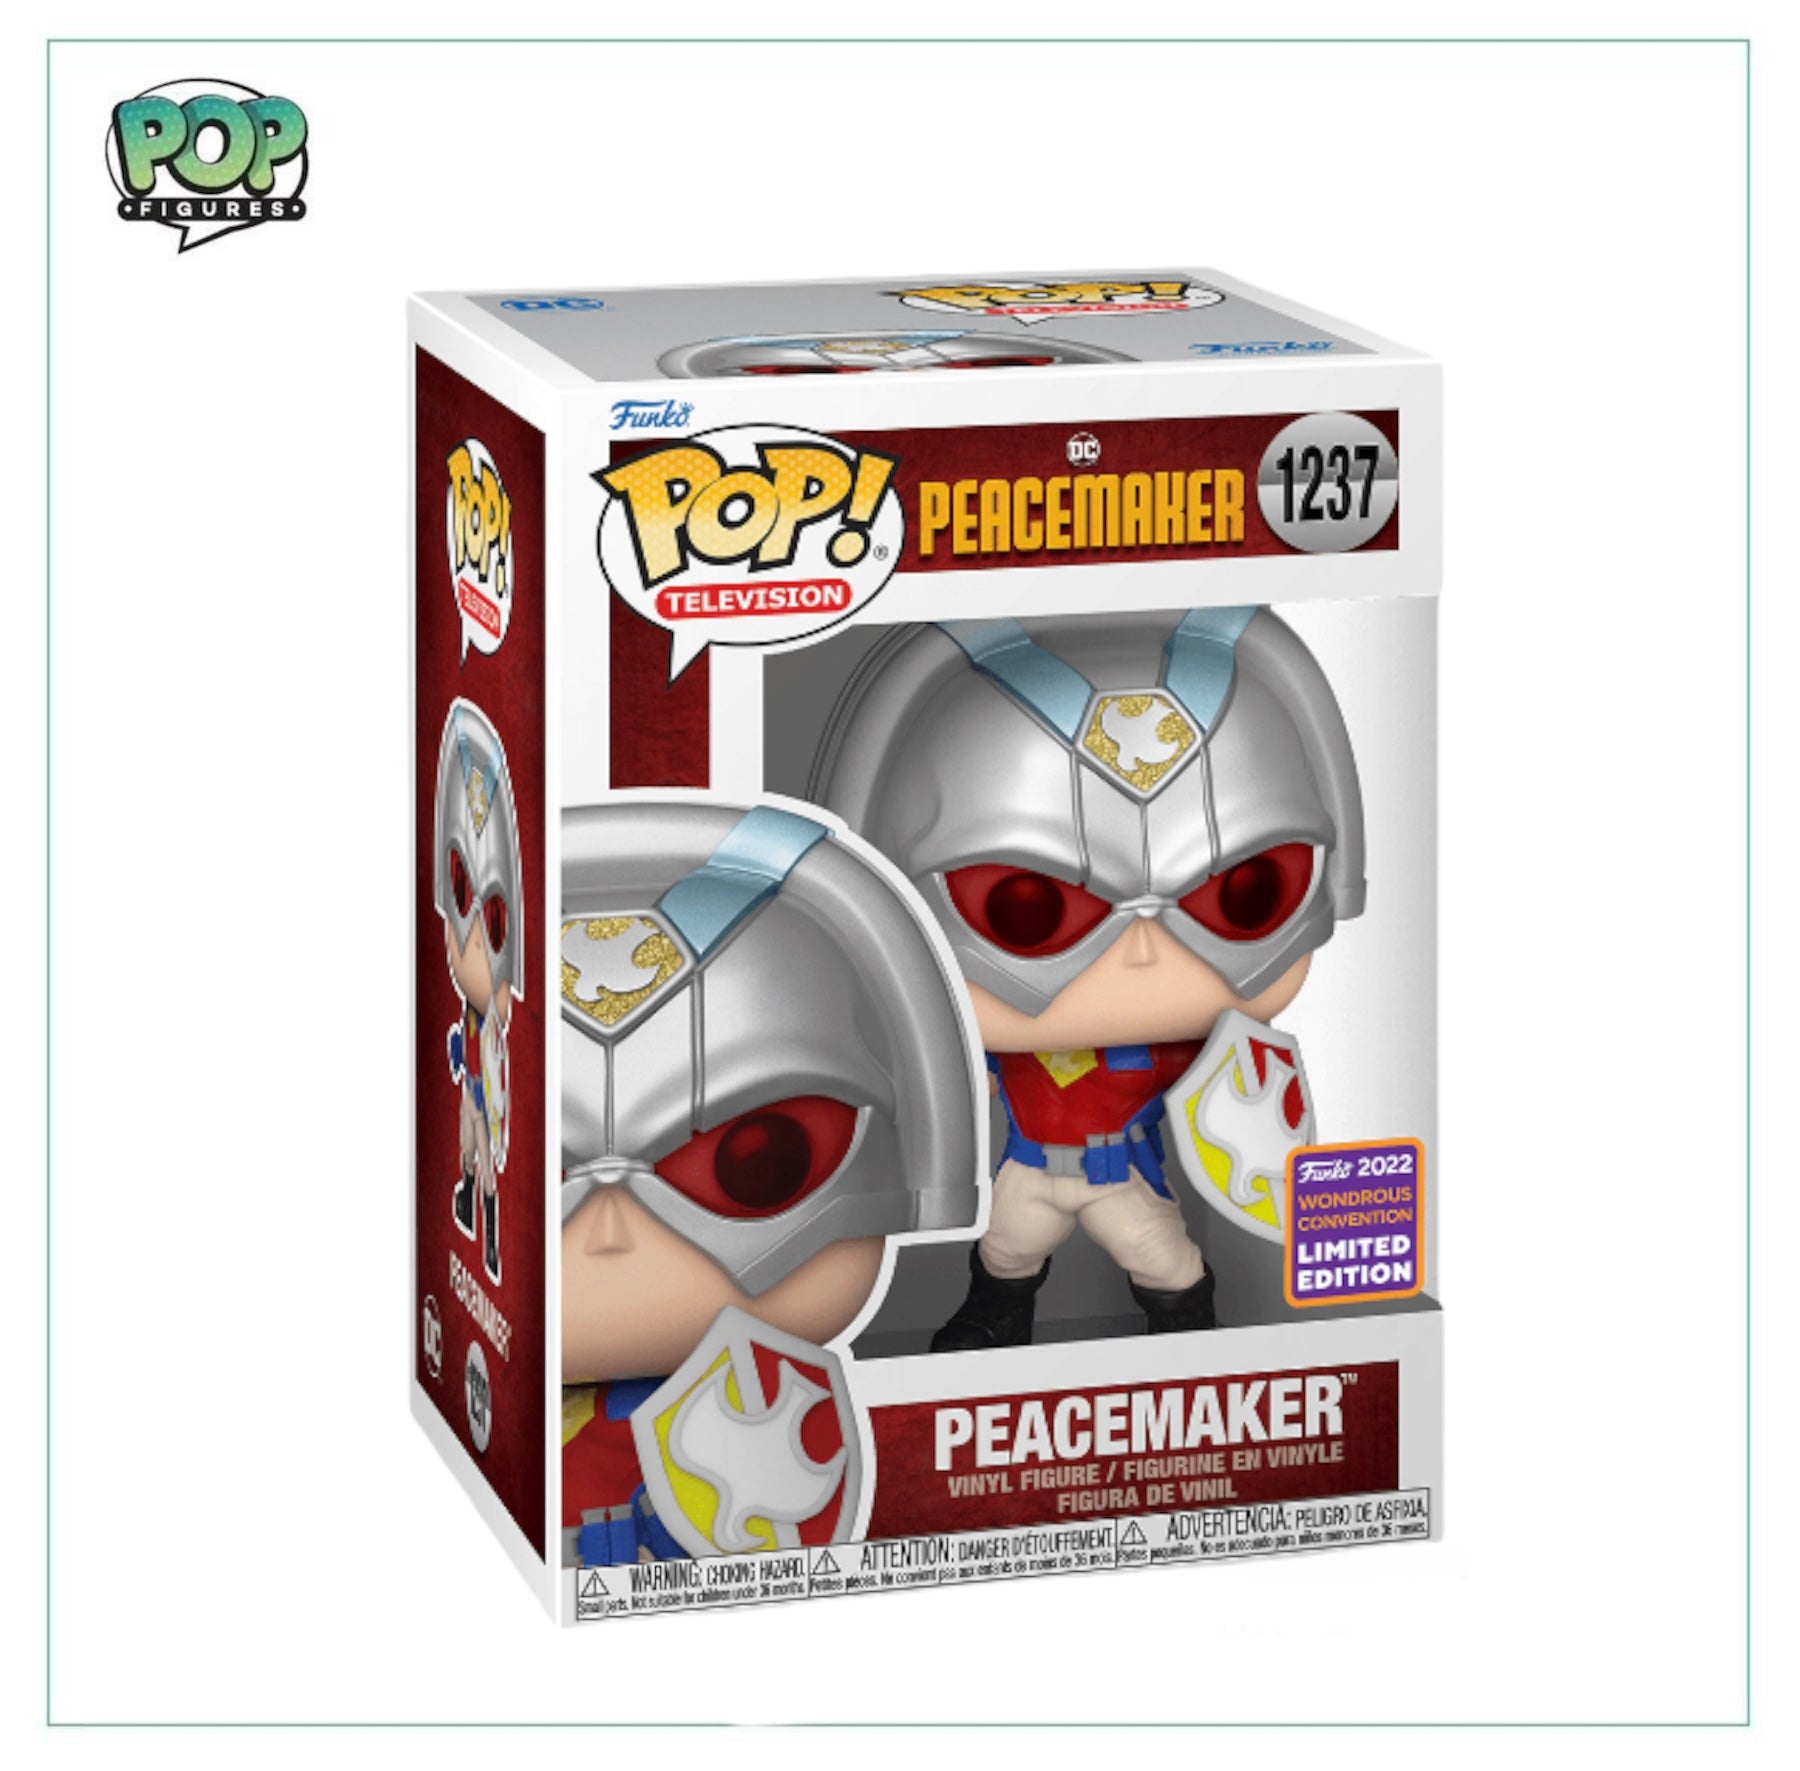 Peacemaker #1237 Funko Pop! DC - 2022 Funko Wonderous Convention Limited Edition